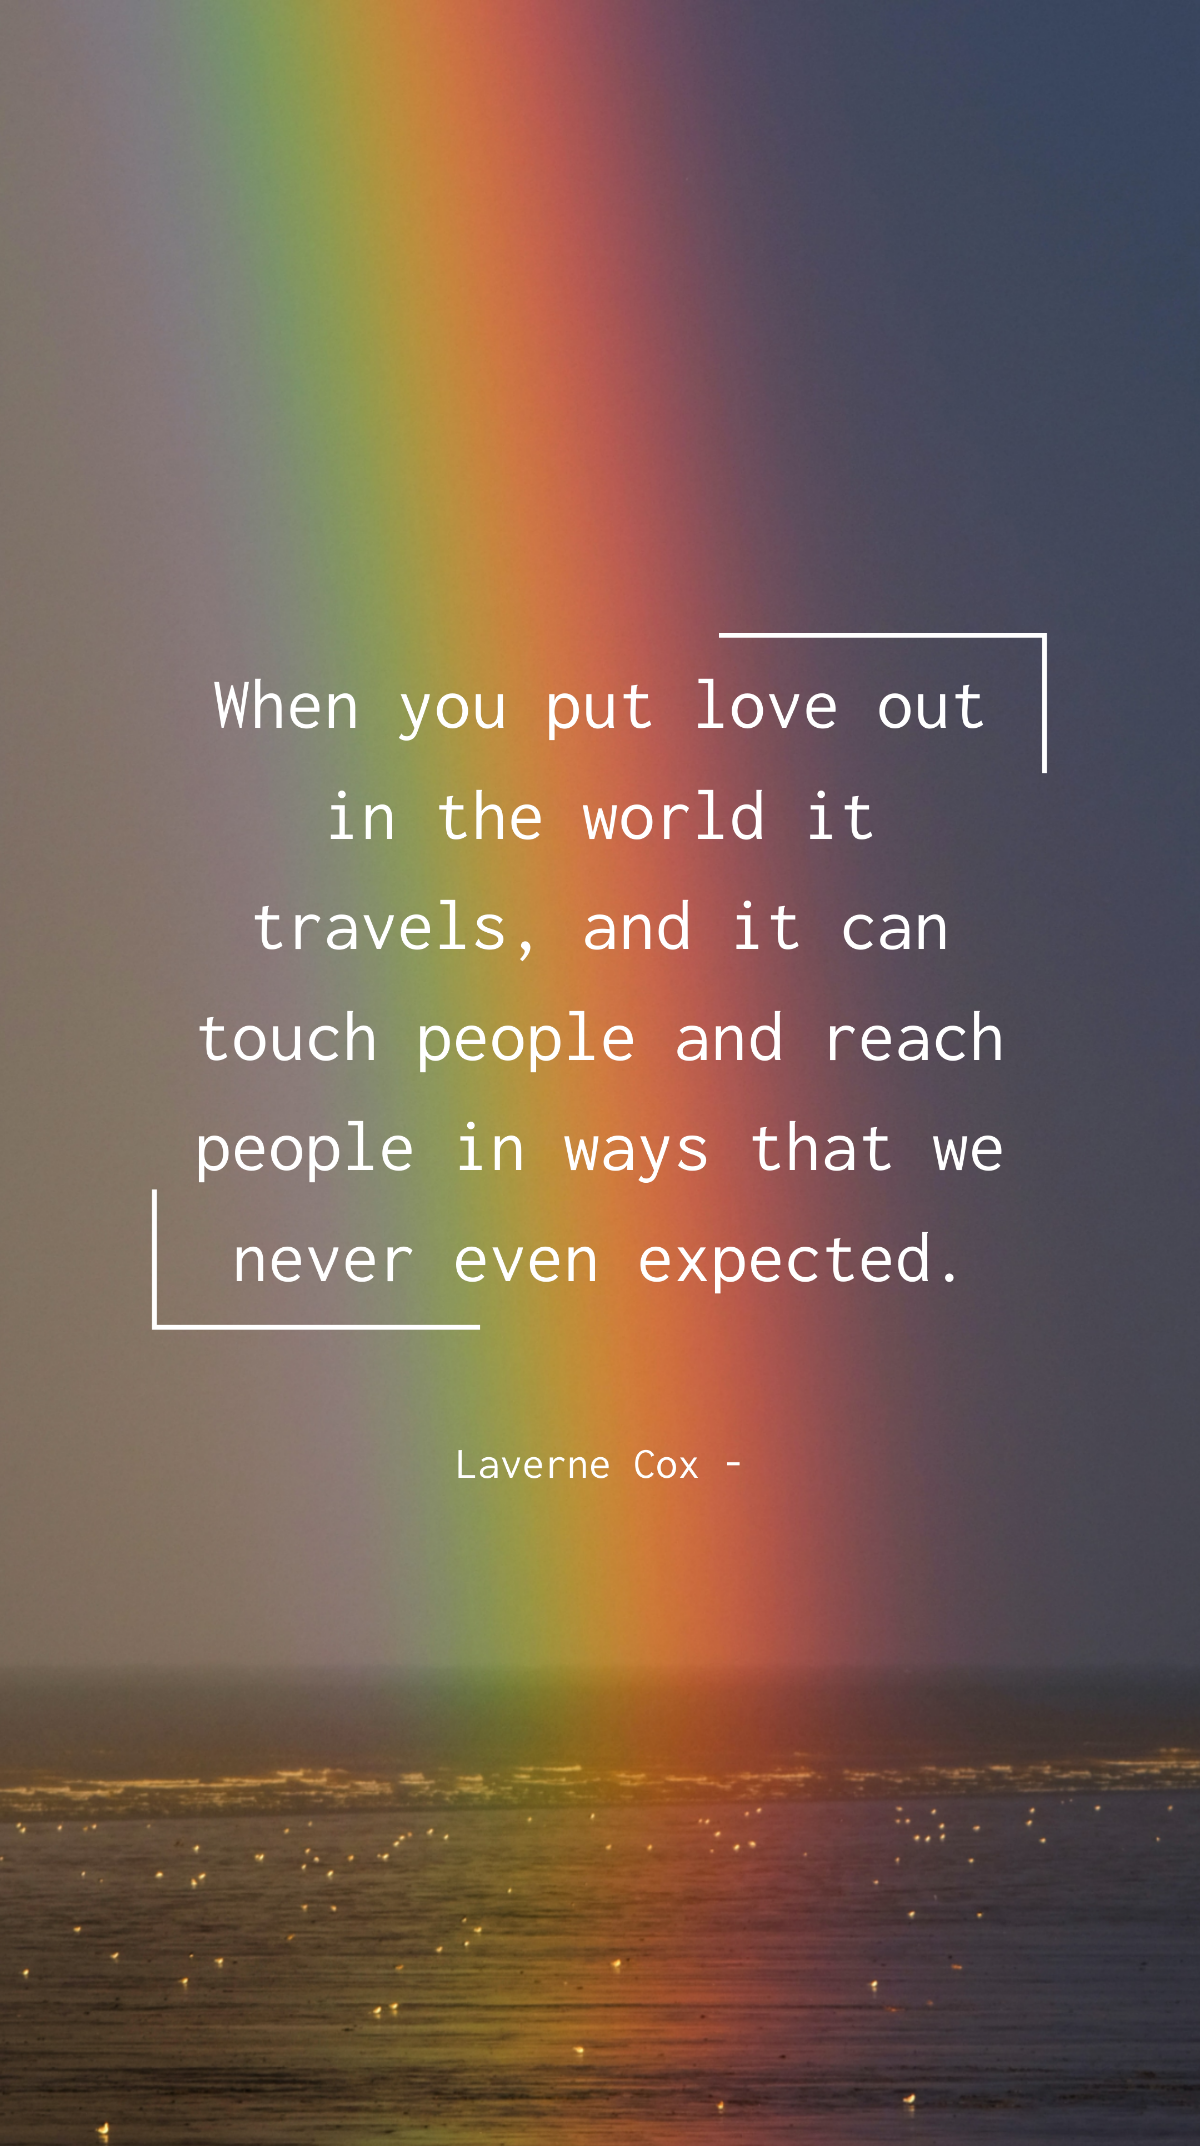 Laverne Cox - When you put love out in the world it travels, and it can touch people and reach people in ways that we never even expected. Template